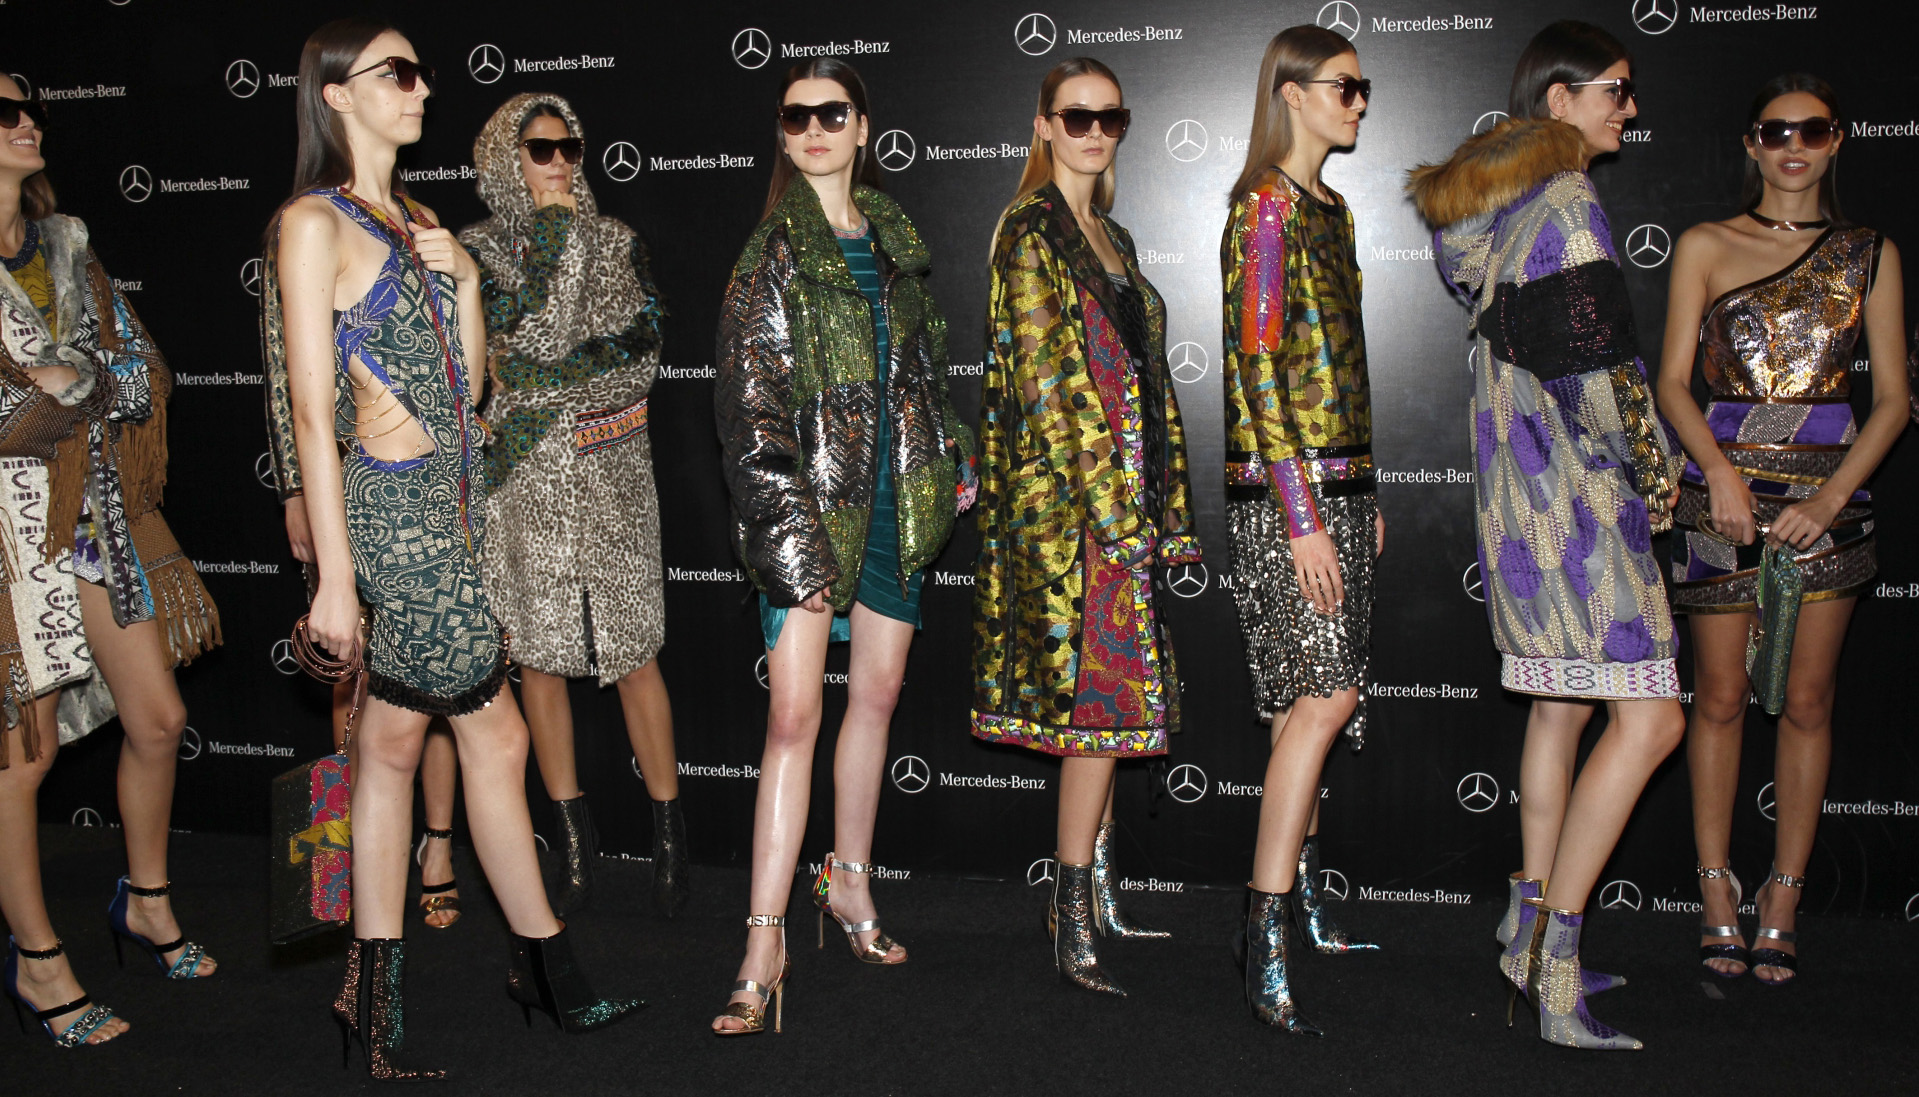 The world’s most important fashion weeks